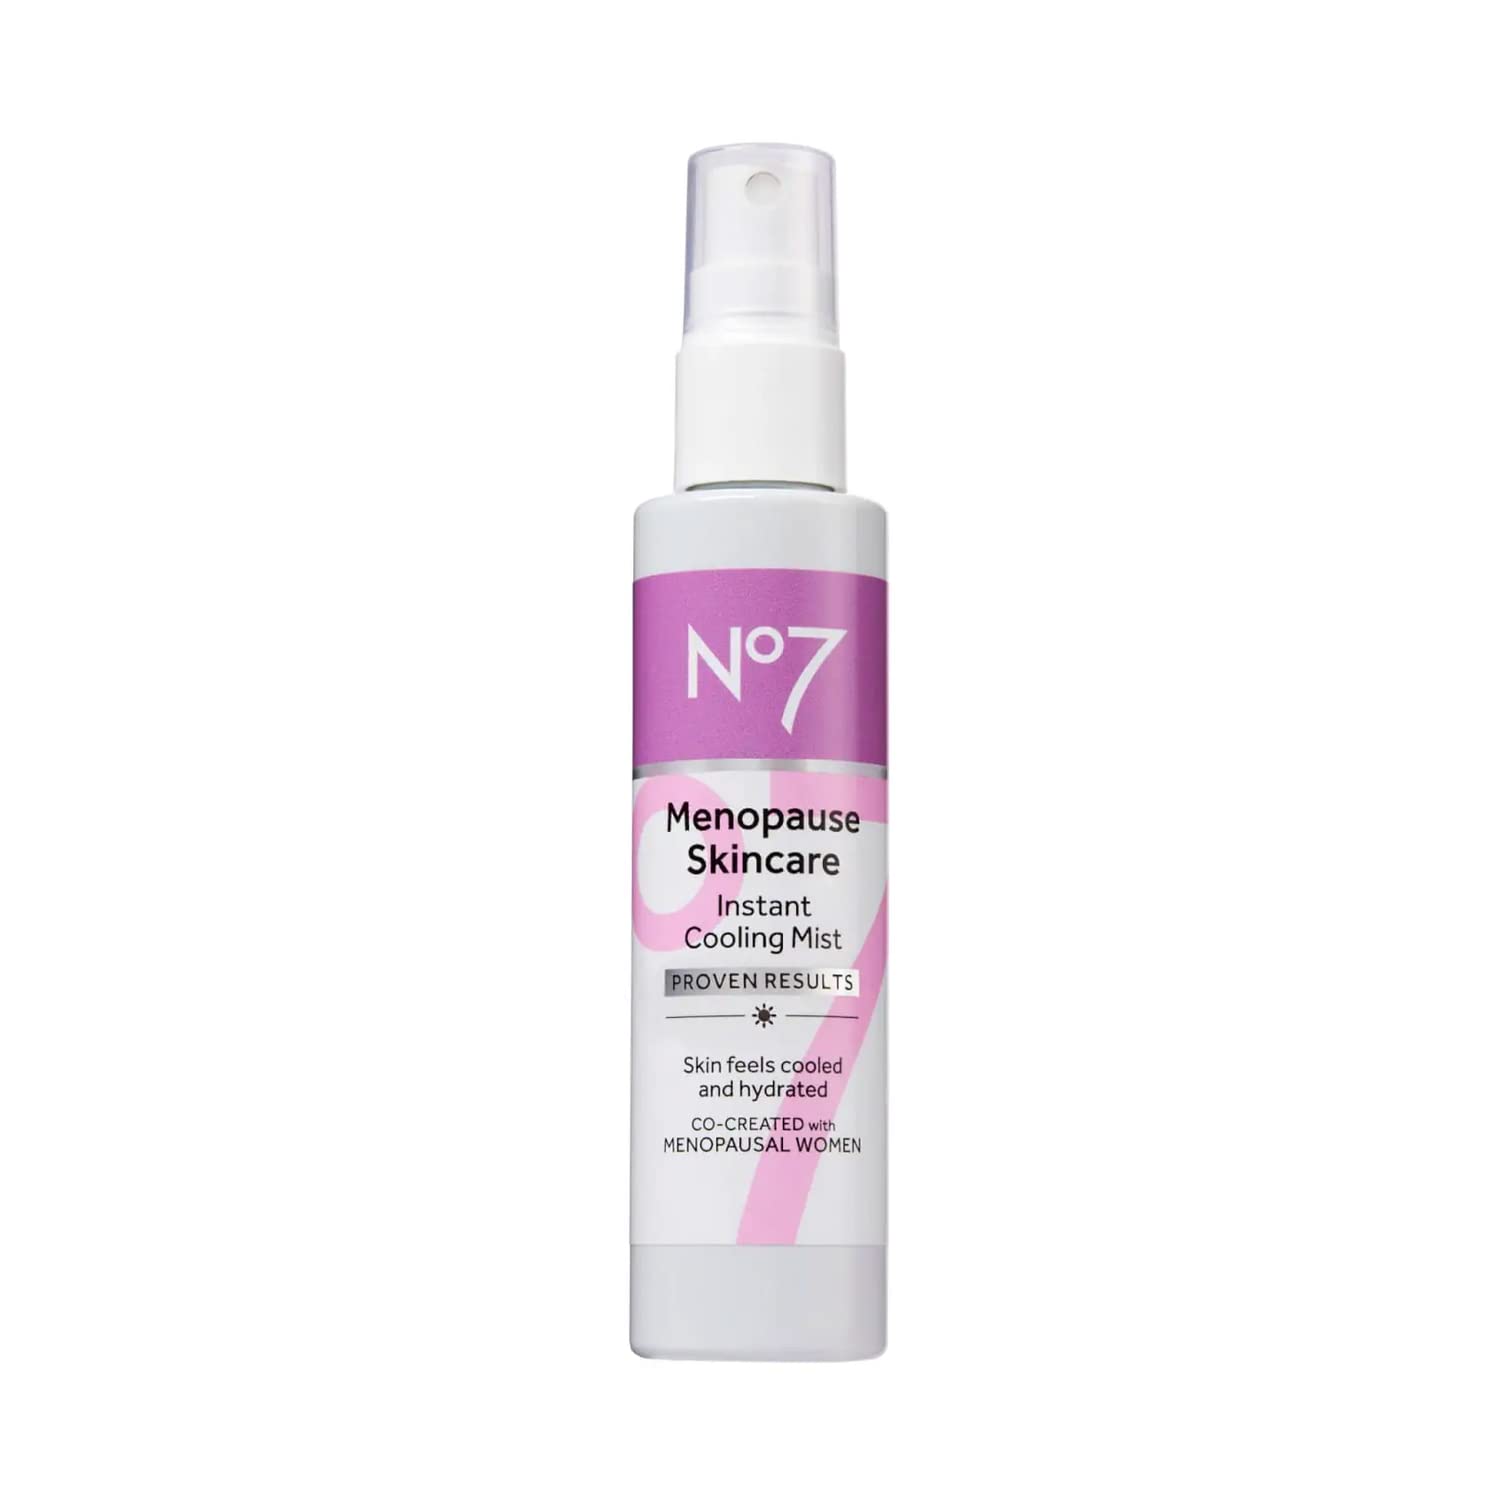 No7 Menopause Skincare Instant Cooling Mist - All Over Cooling Facial Mist for Daily Menopause Relief of Hot ashes - Moisturizing Glycerine + Refreshing Rosewater Calms & Smoothes Dry Skin (100 )